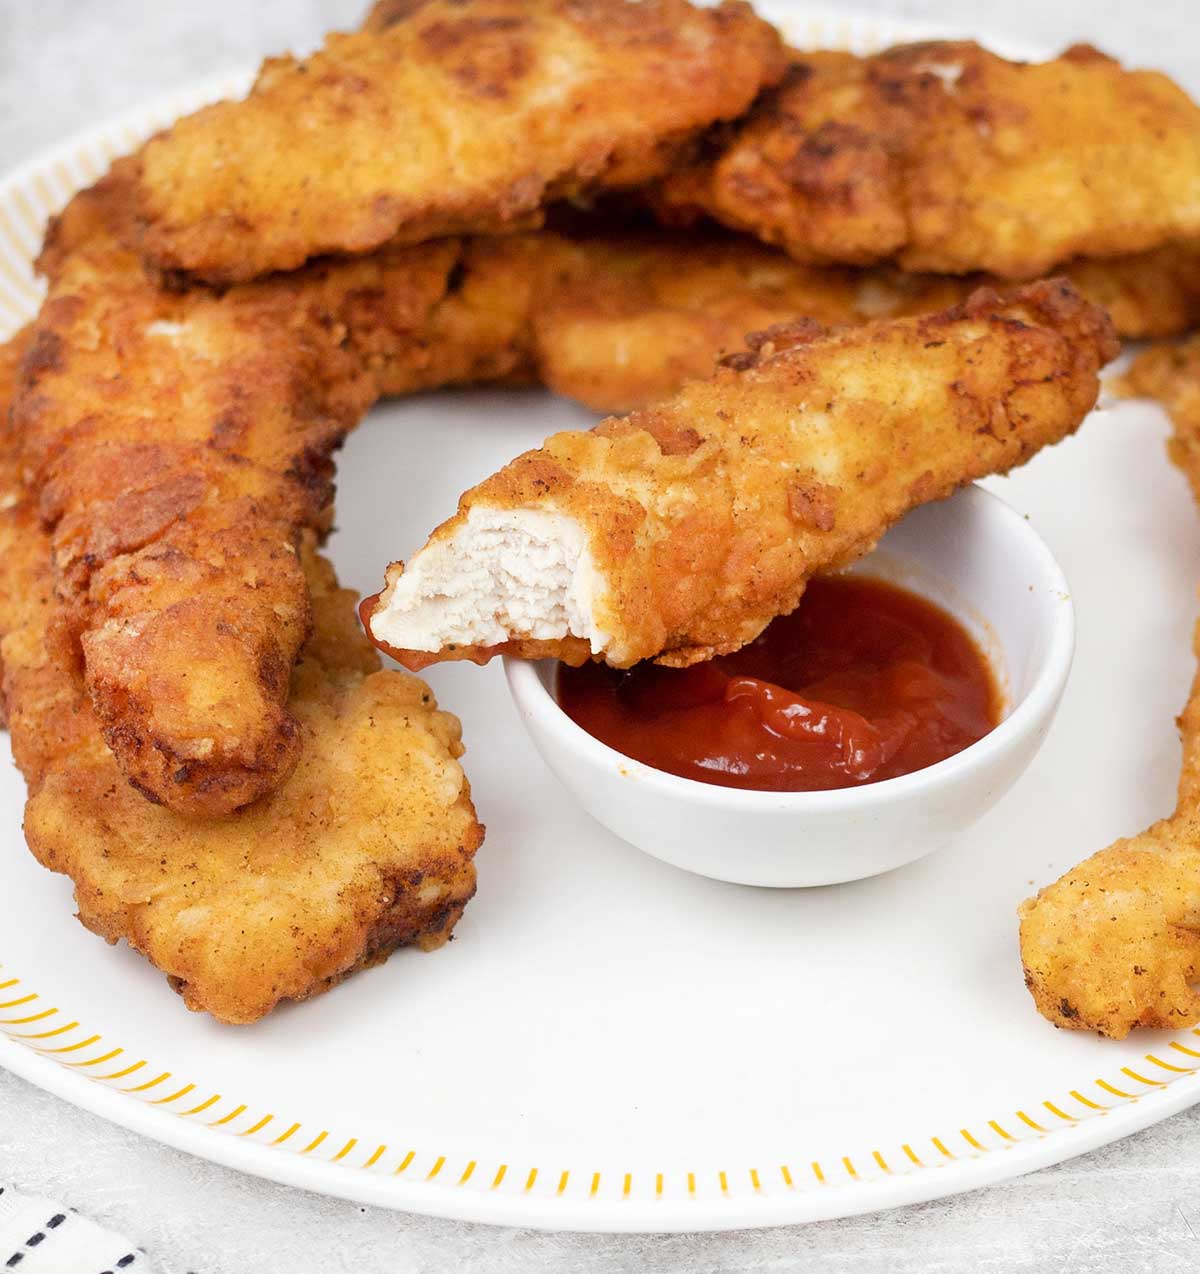 Fried chicken fingers and a bowl of ketchup.